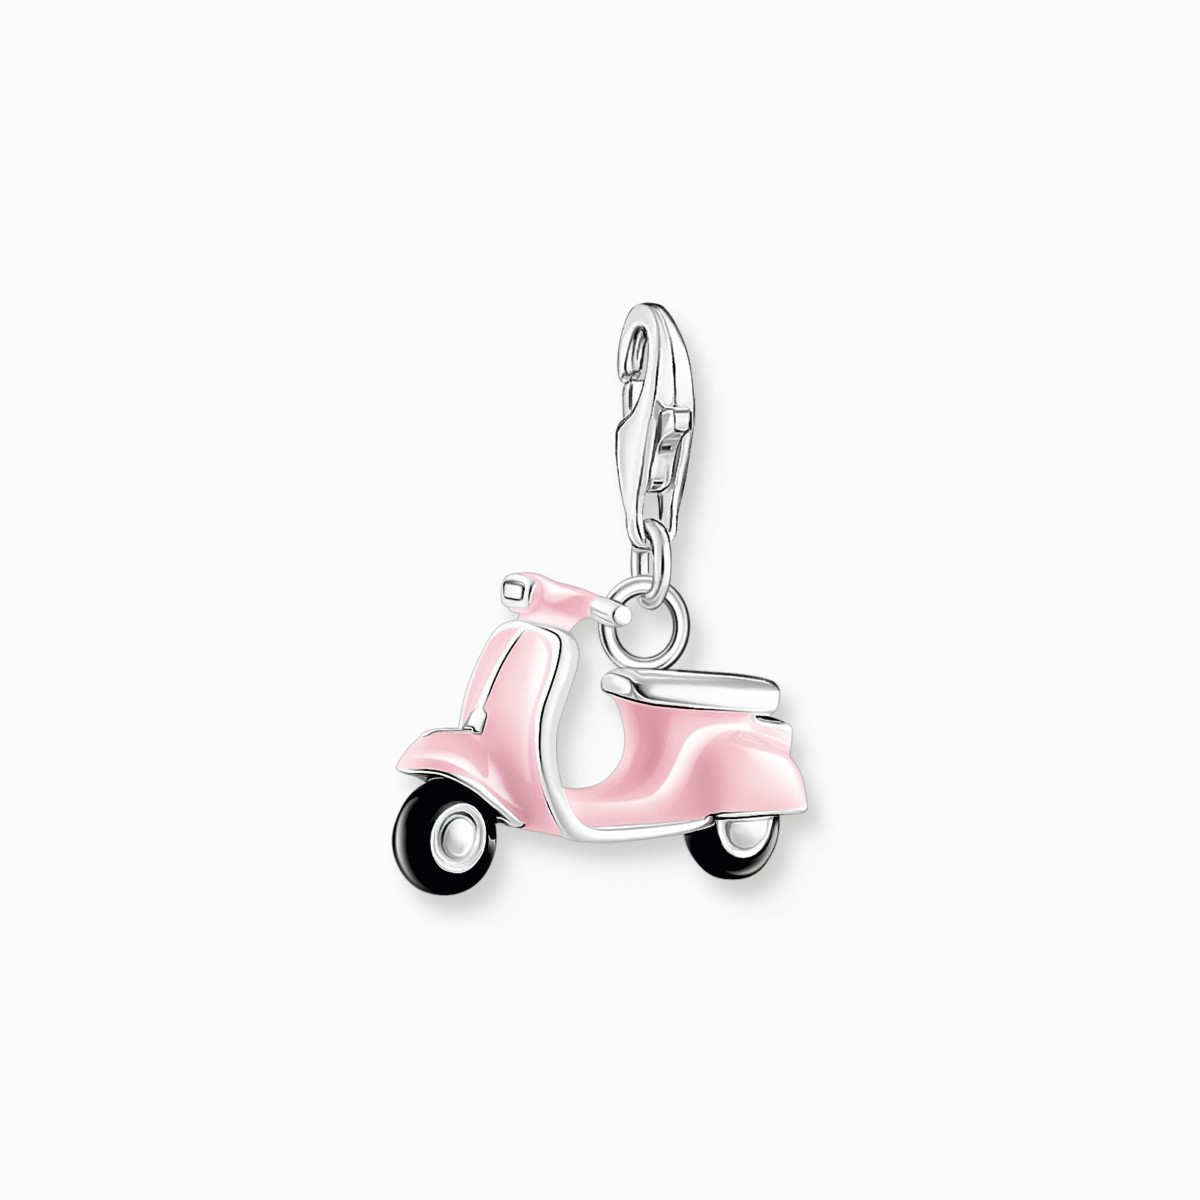 Photos - Other Jewellery Thomas Sabo Charm Pendant - Pink Enamel Vespa Moped Scooter 